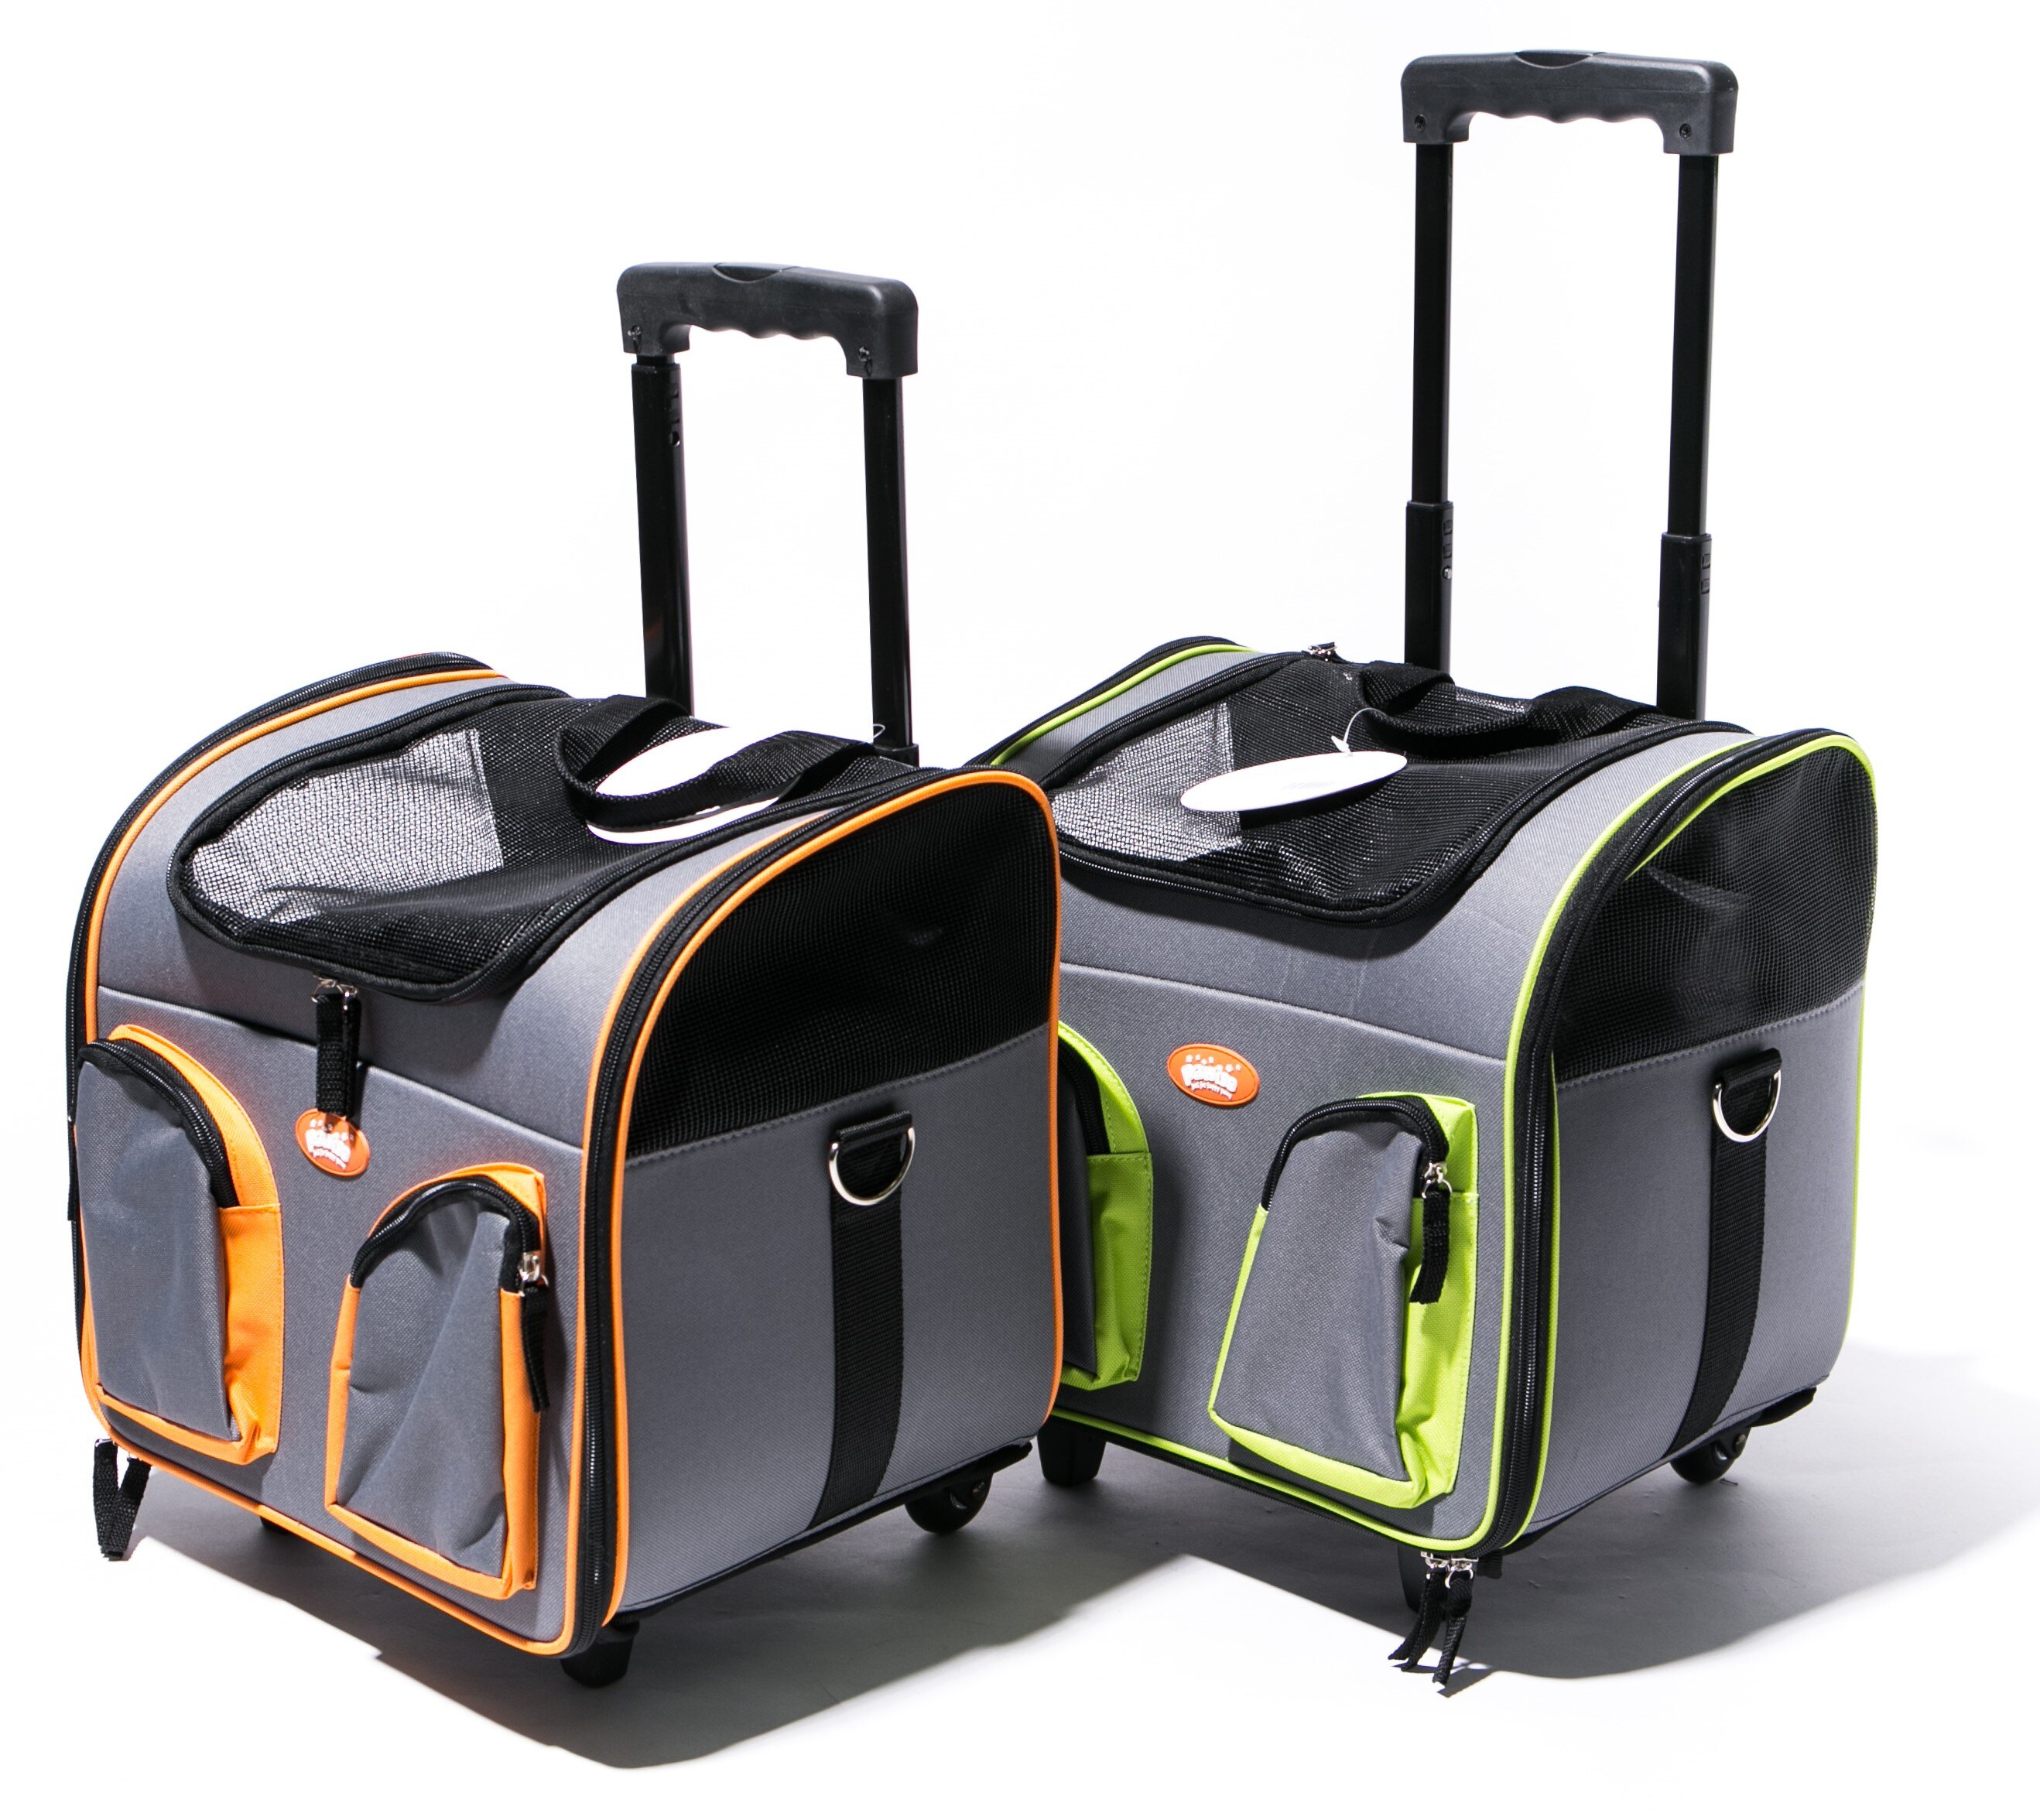 Pawise Soft Pet Travel Carrier with Wheels DogBeds & HousesCarriers